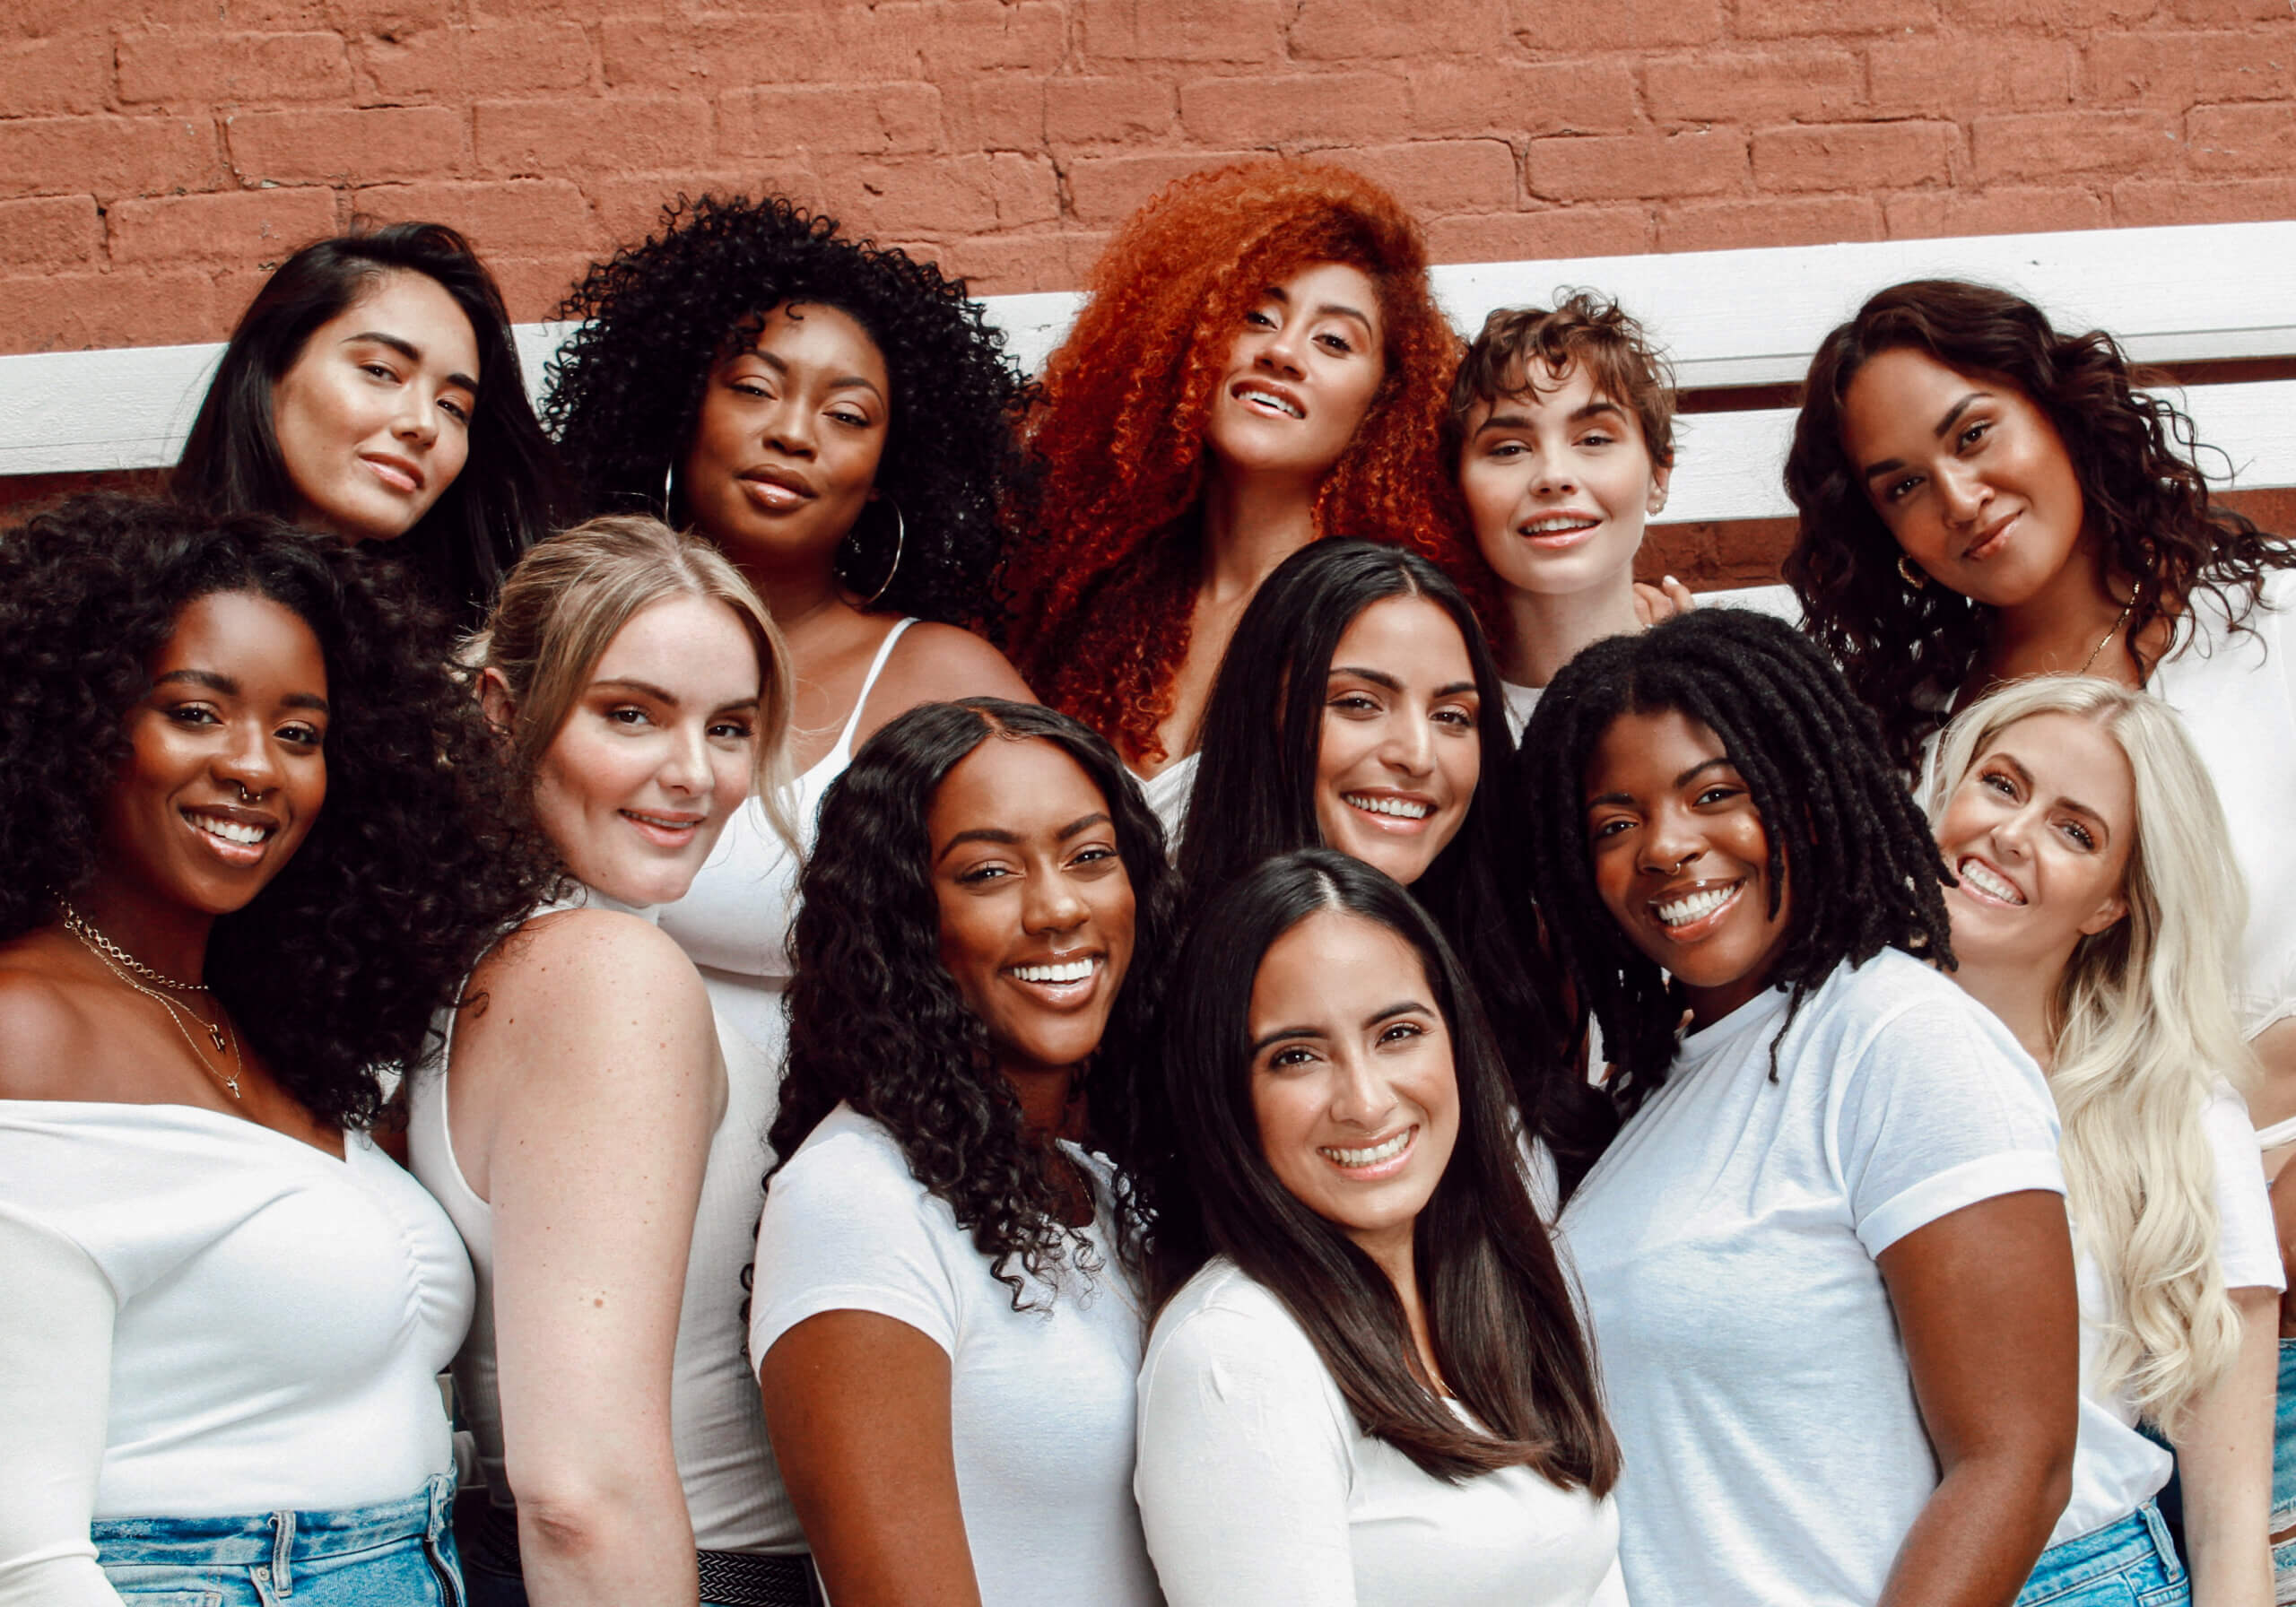 Group of diverse women posing for photo